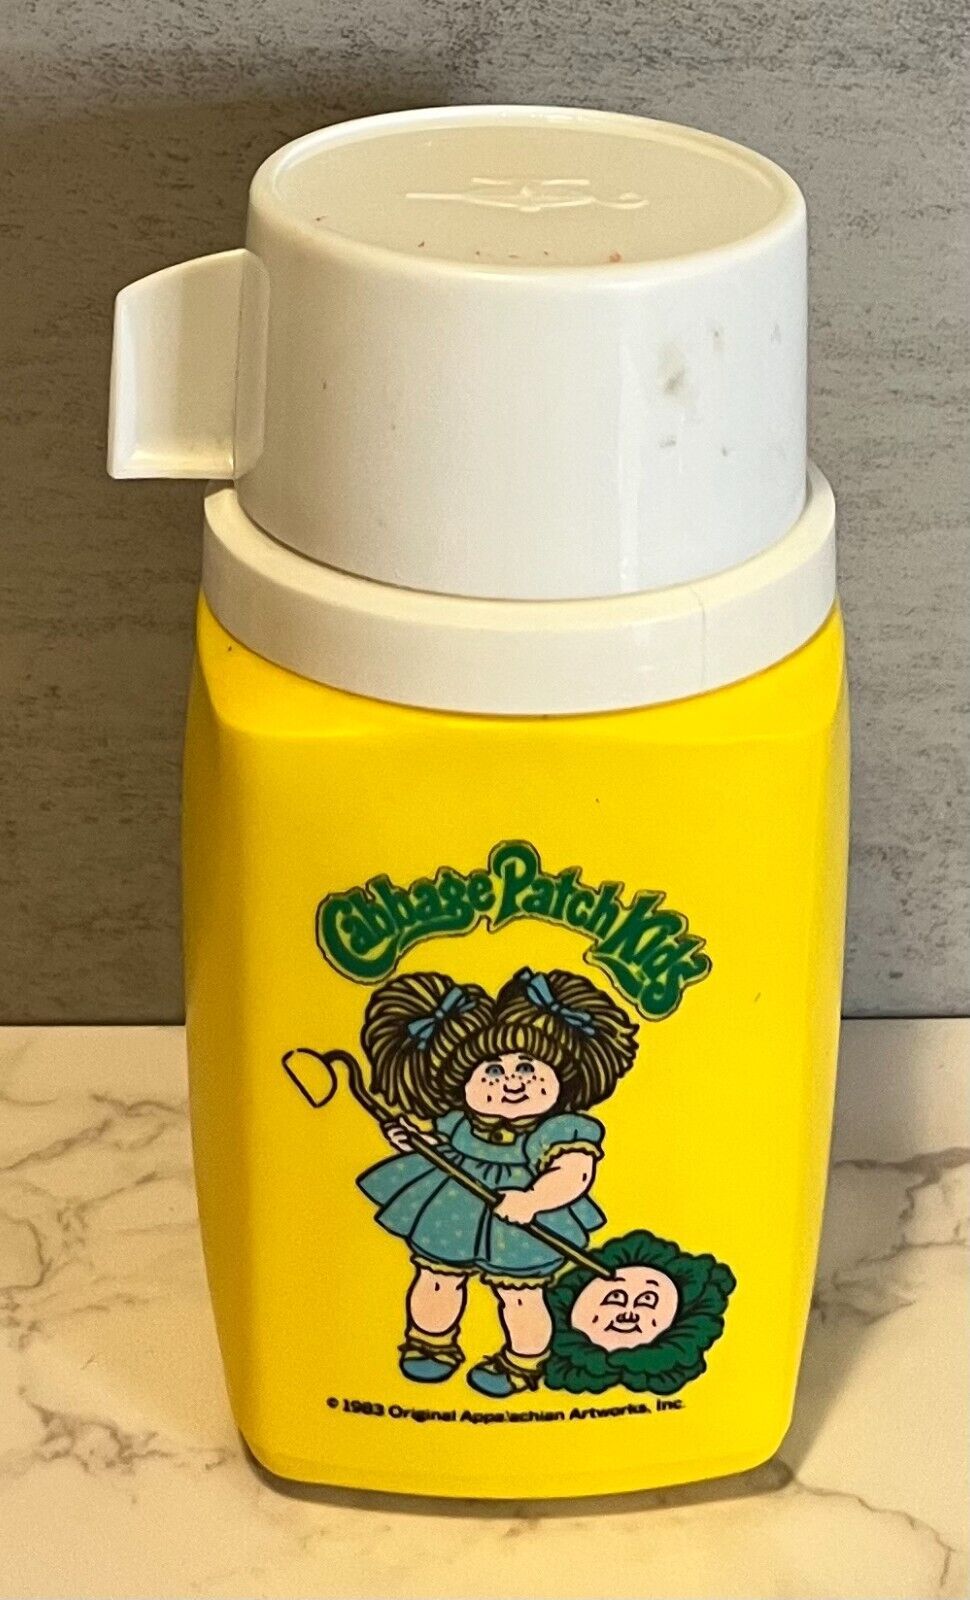 VTG Cabbage Patch Kids Yellow Thermos 1983 Print Still Sharp A6 - $9.27